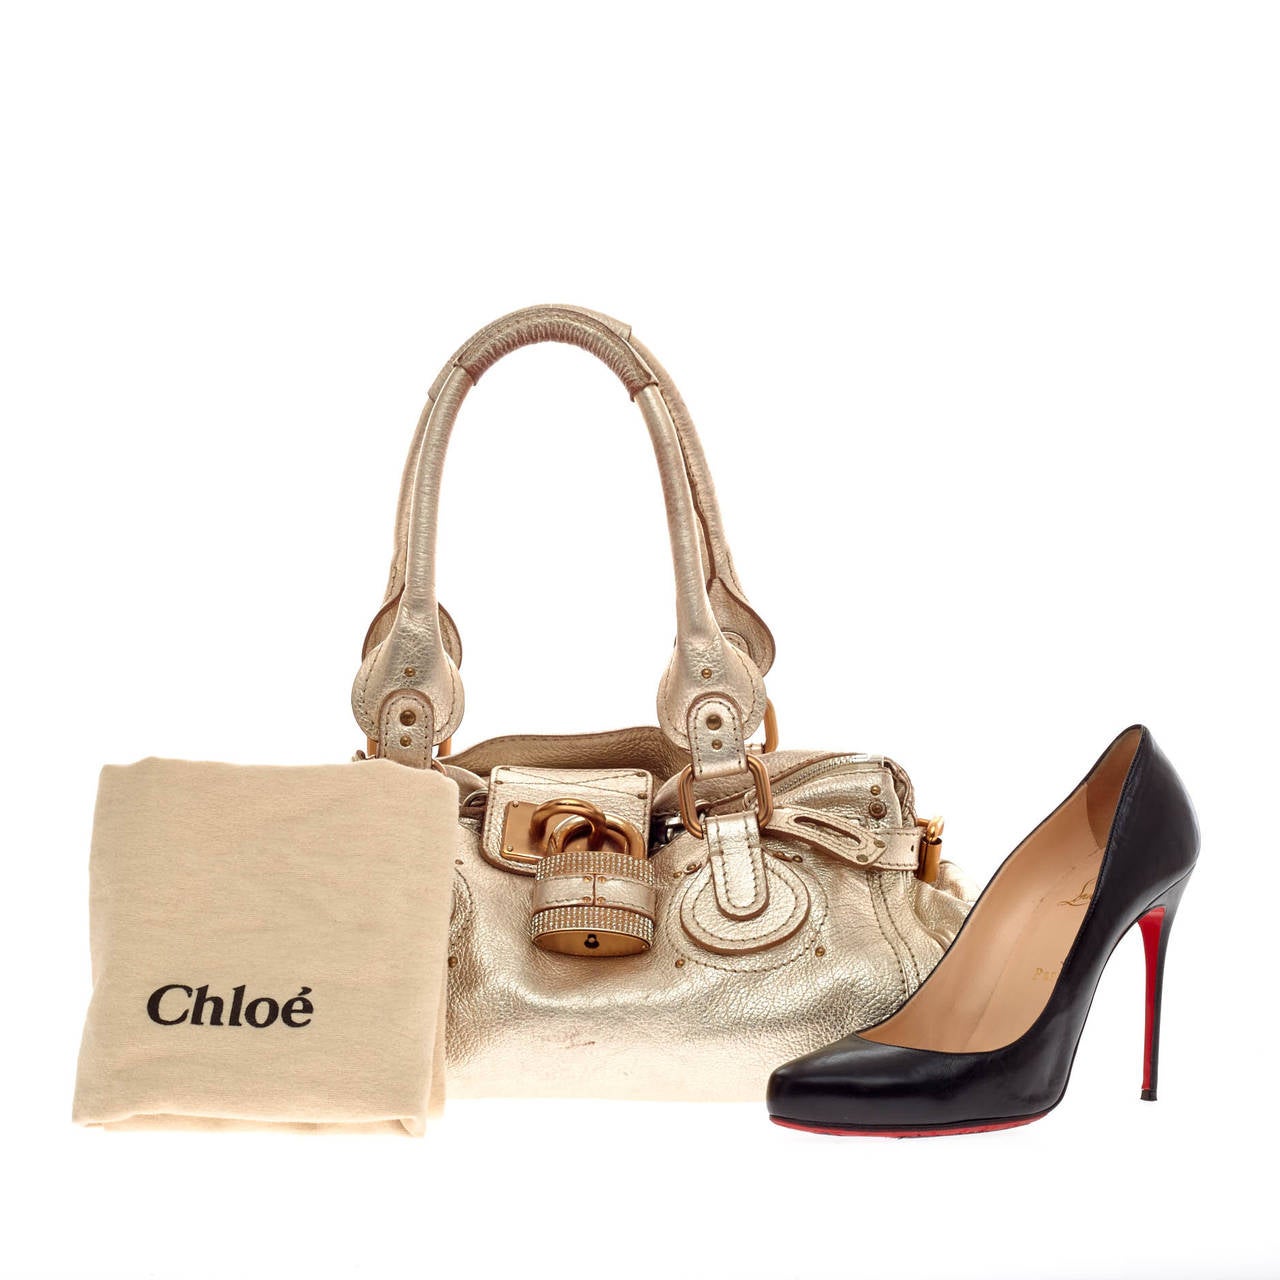 This authentic Chloe Paddington Swarovski Lock Leather in Medium created by Phoebe Philo, in shining gold, is an exclusive must-have. Its intricate design, donned with an oversized signature padlock that is dazzled in gemstones and key, is eye